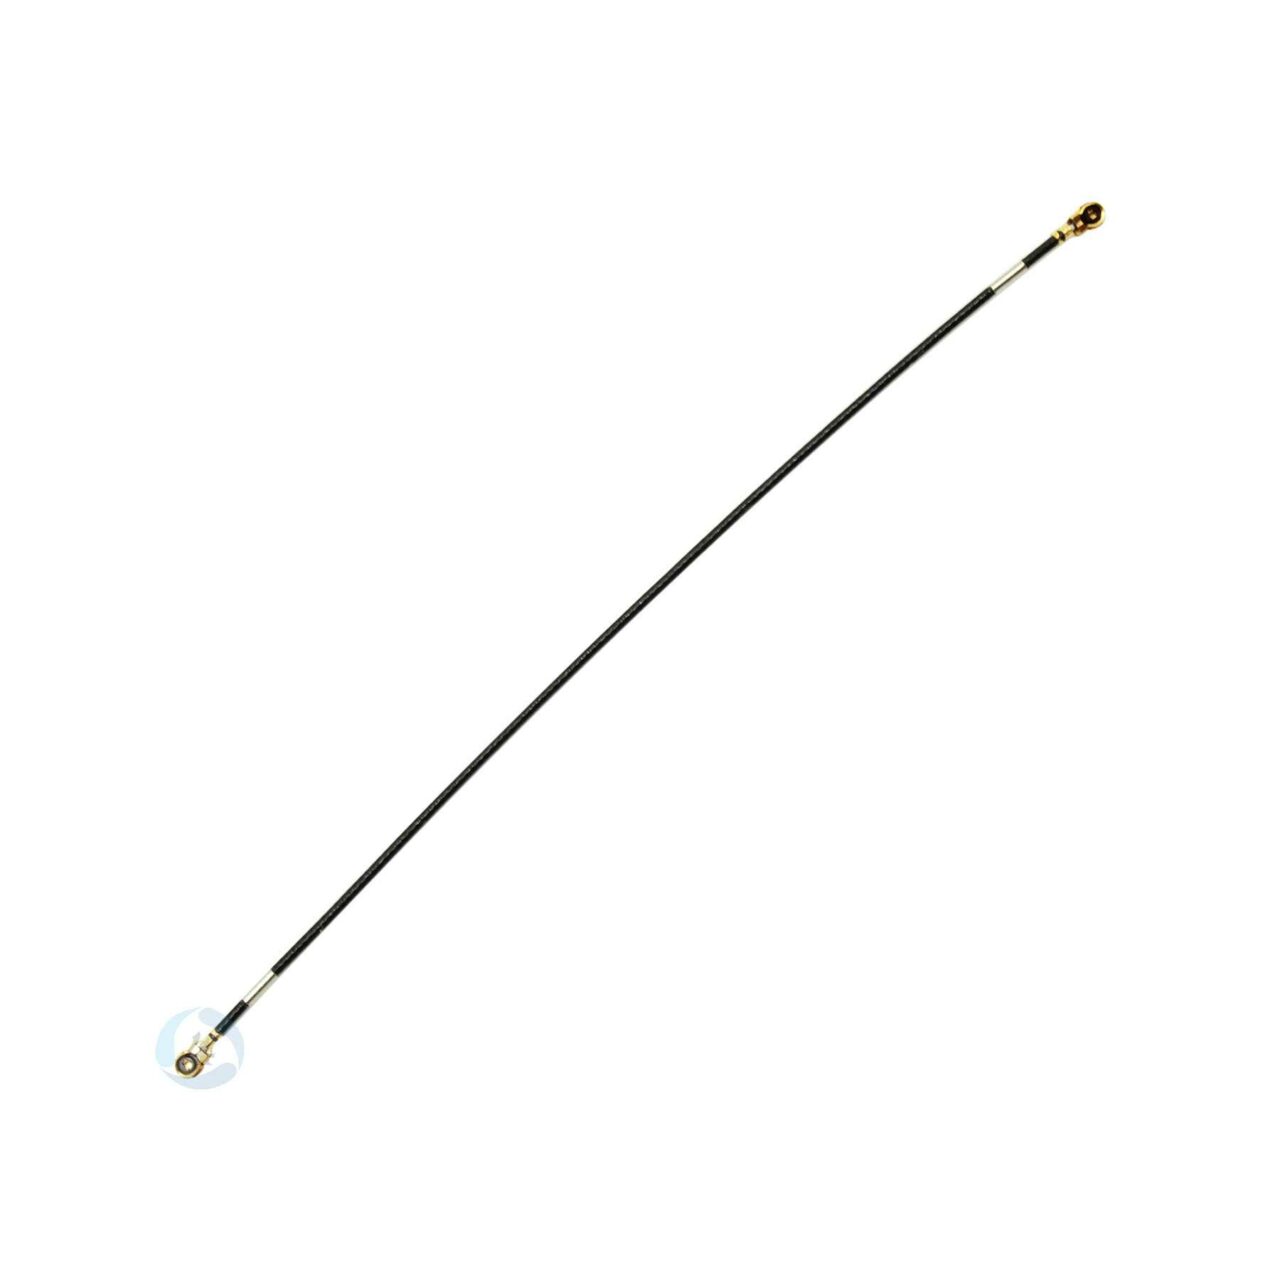 Sony L1 antenna cable